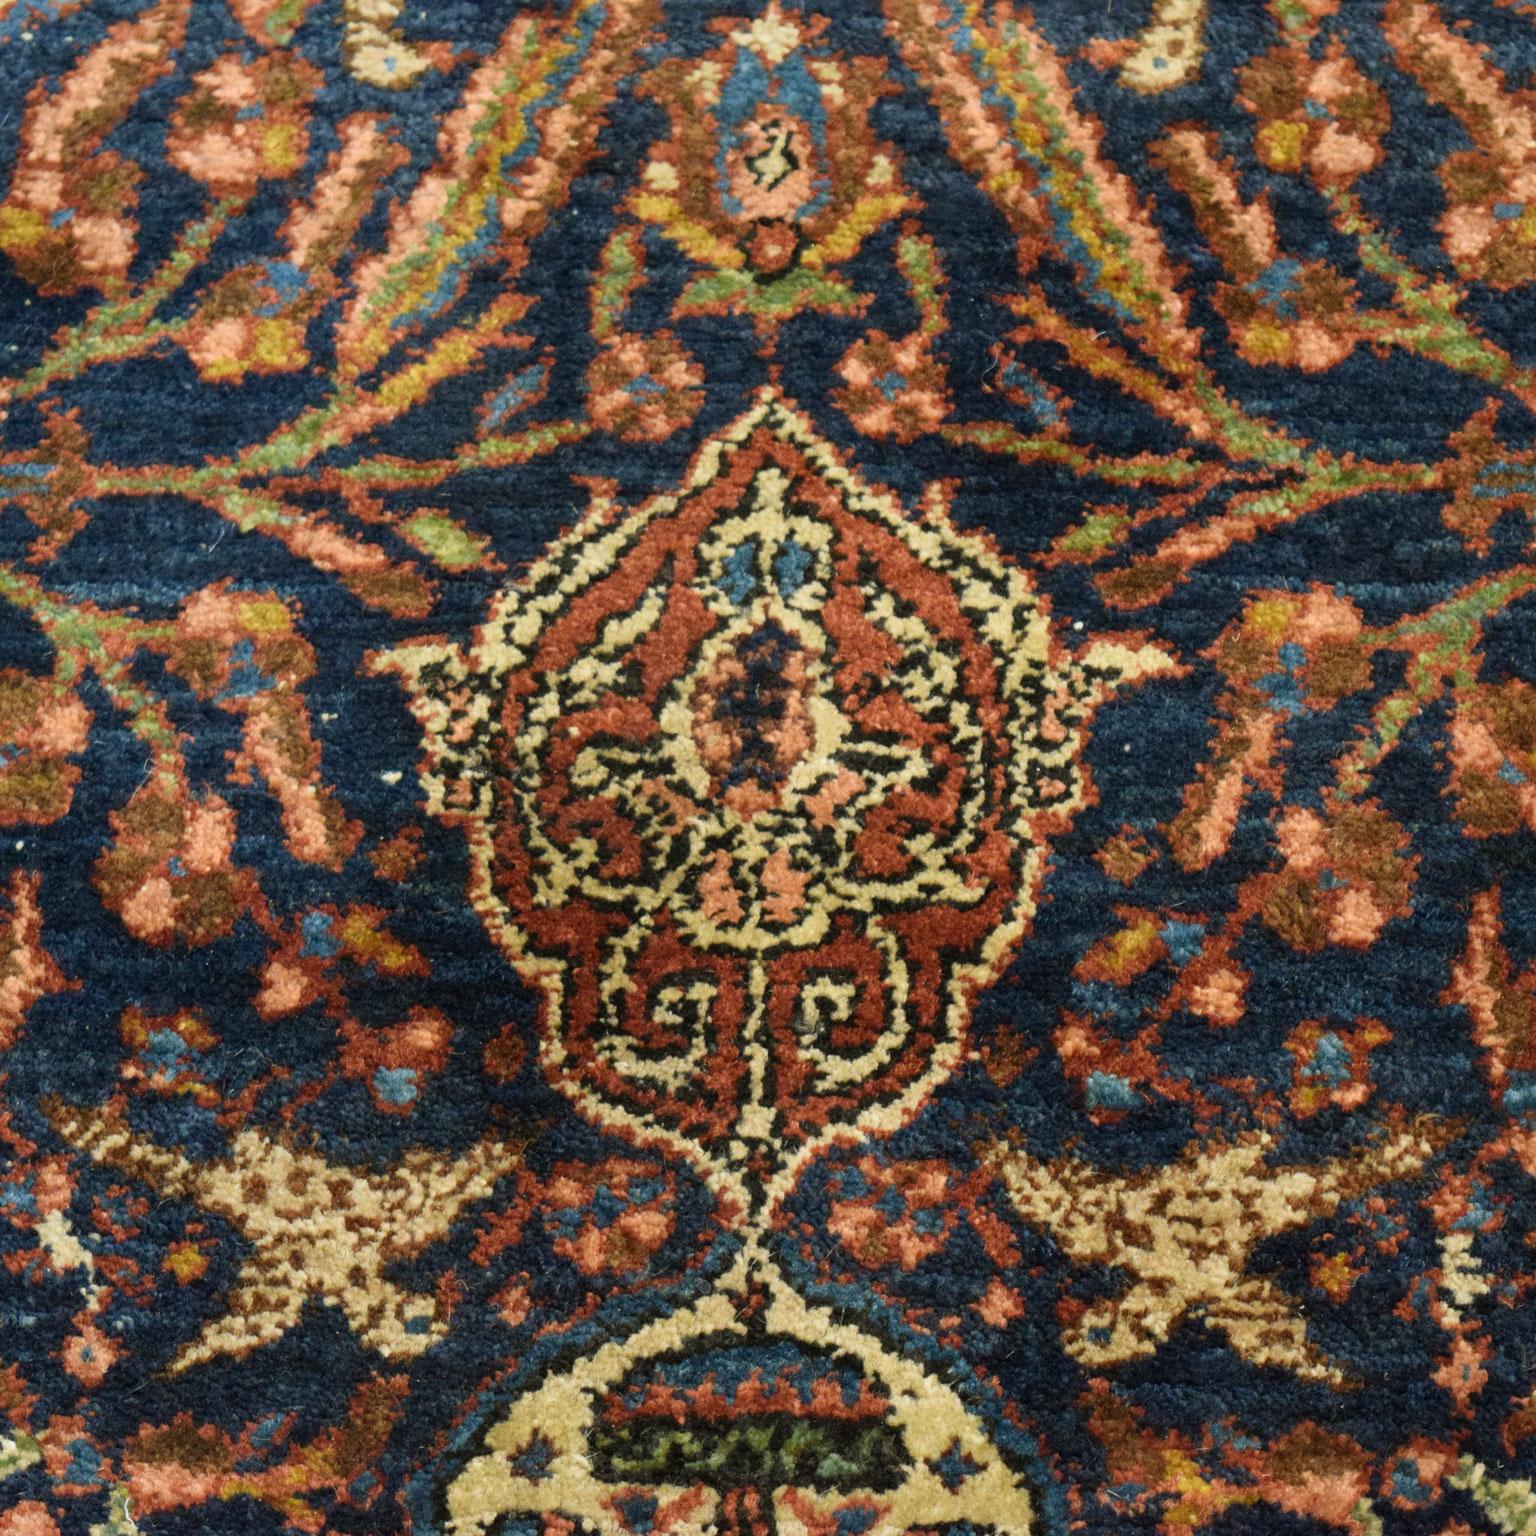 Vegetable Dyed Antique 1900s Wool Persian Khoy Rug in Cream, Green, and Indigo, 5' x 8' For Sale